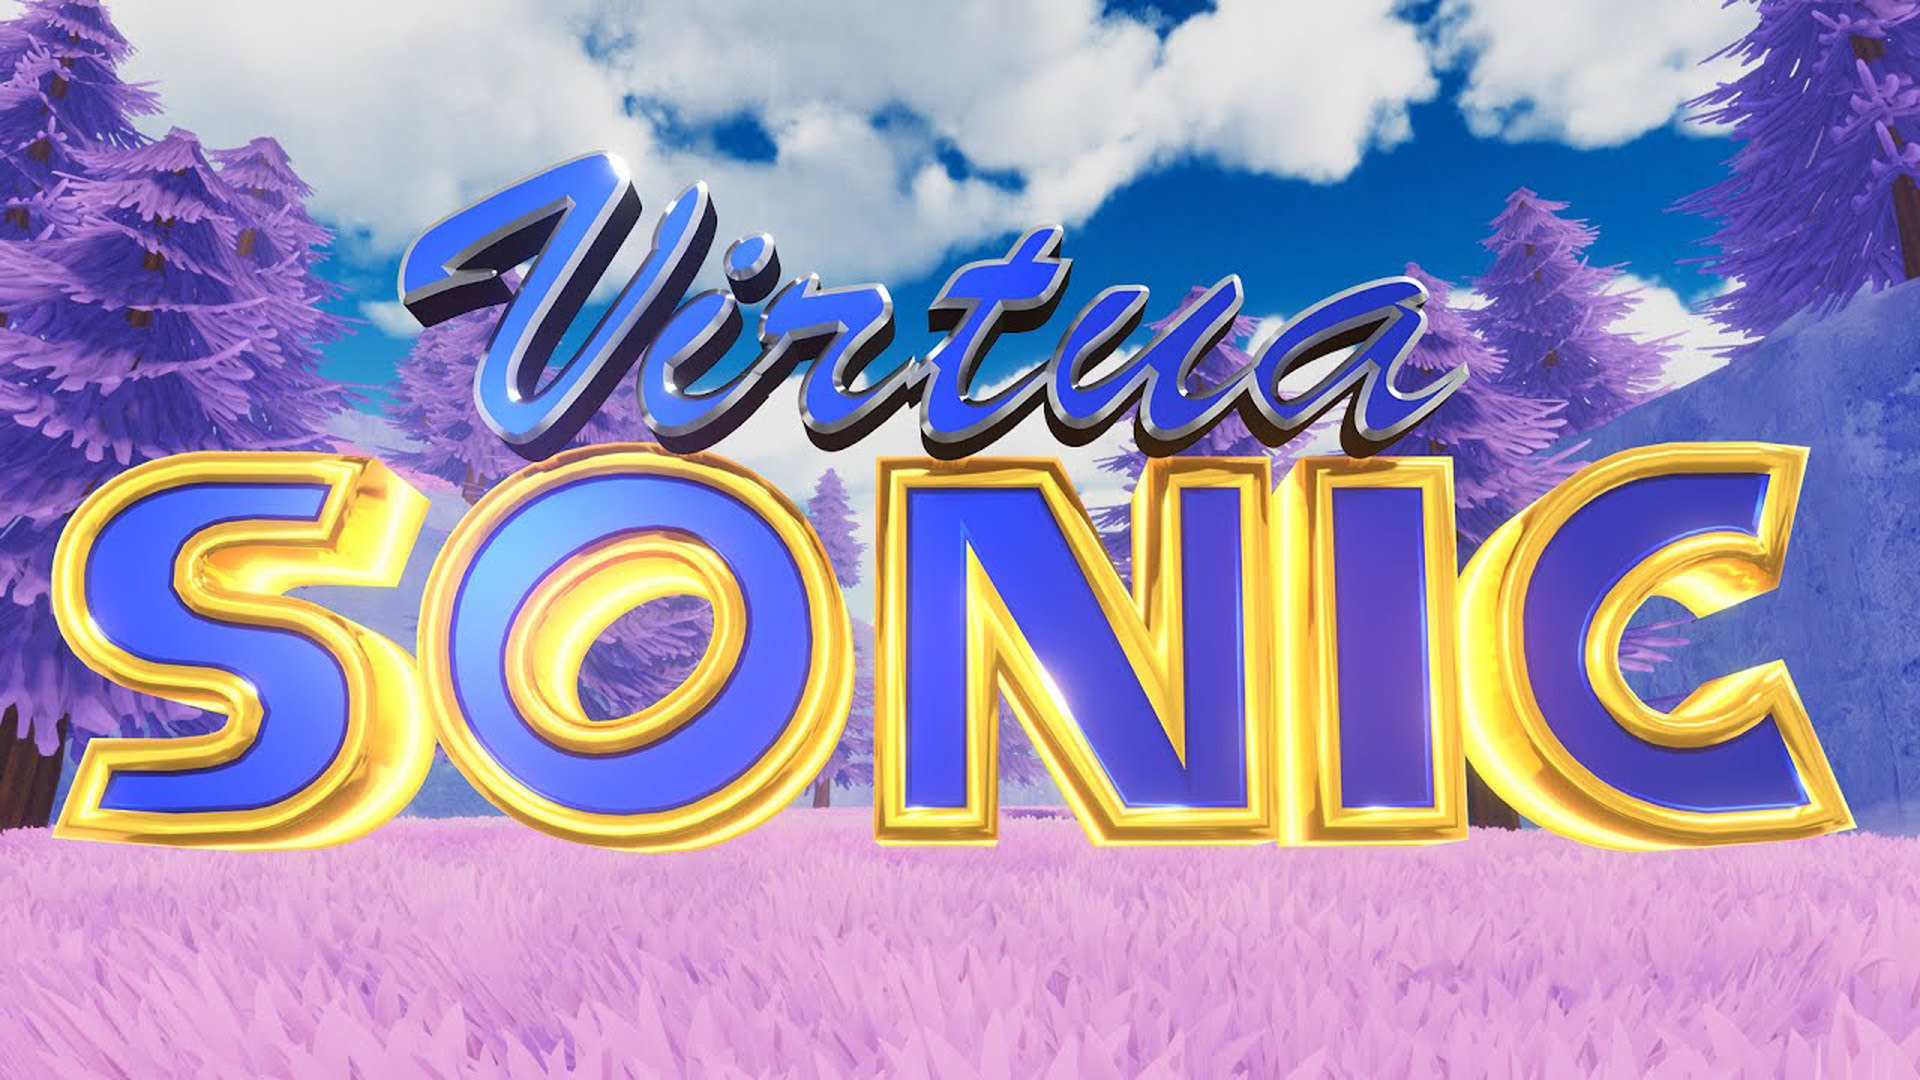 Sonic After Forces (Mobile Fangame) 